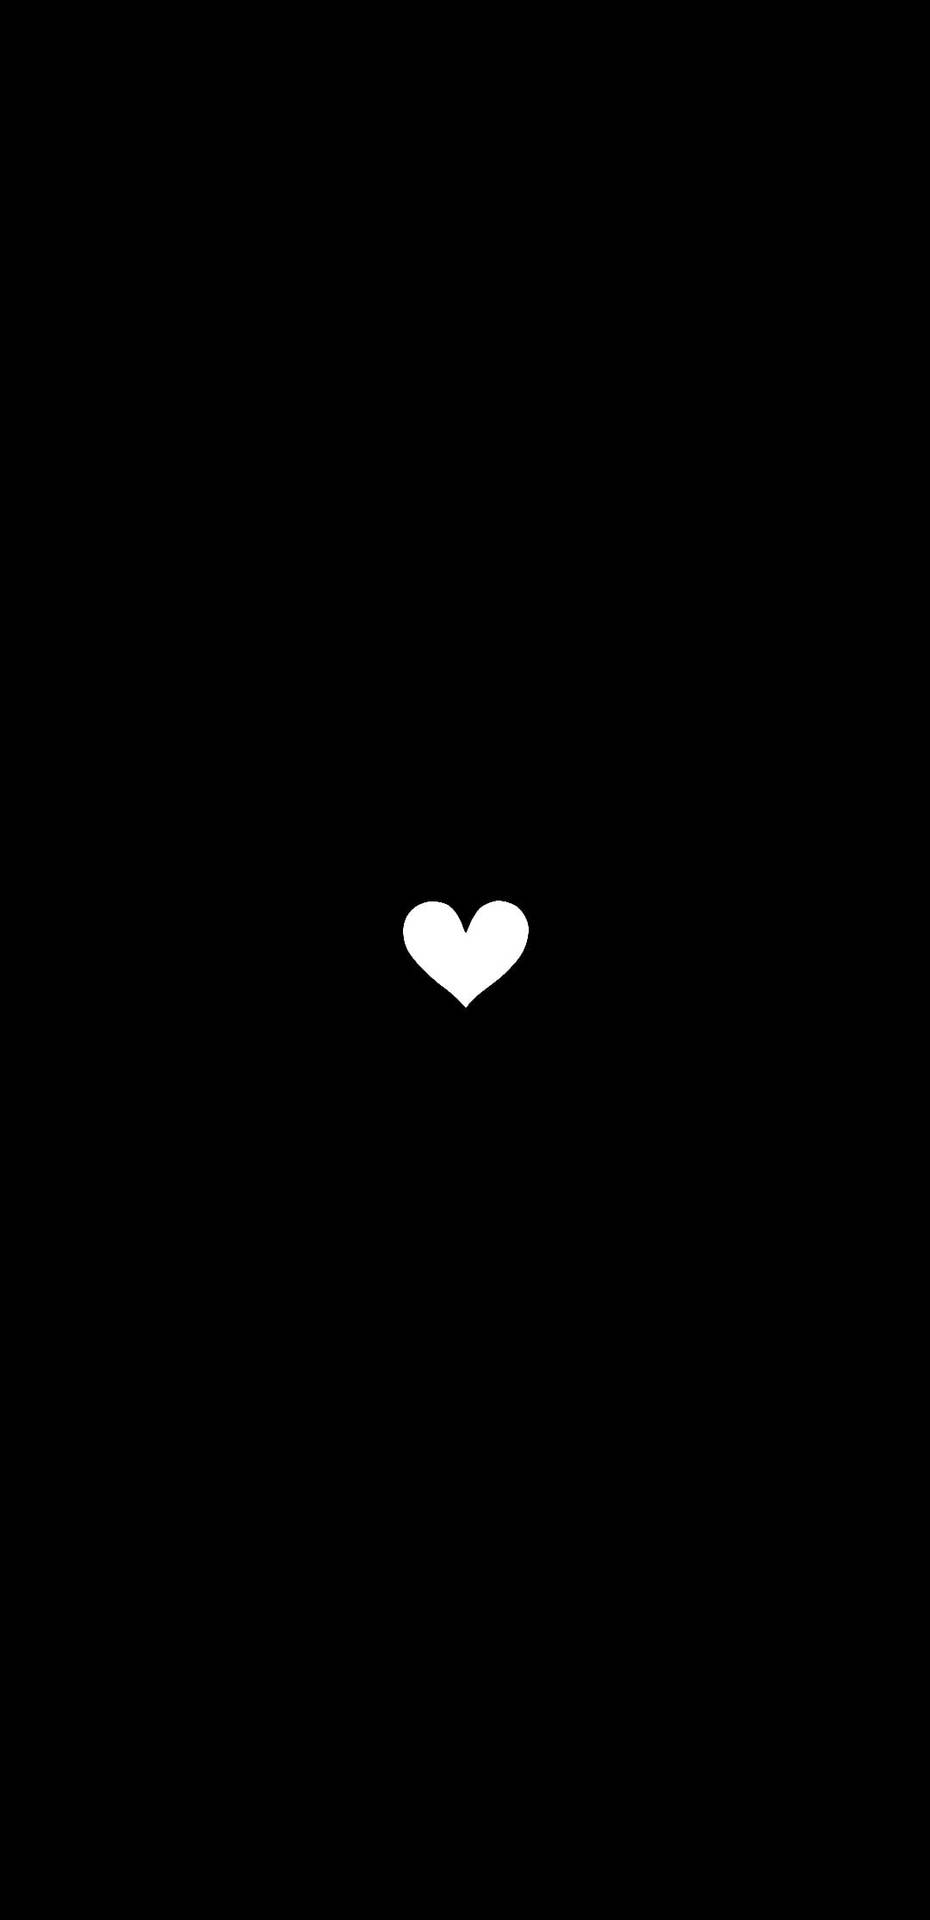 Small Black And White Heart Wallpaper